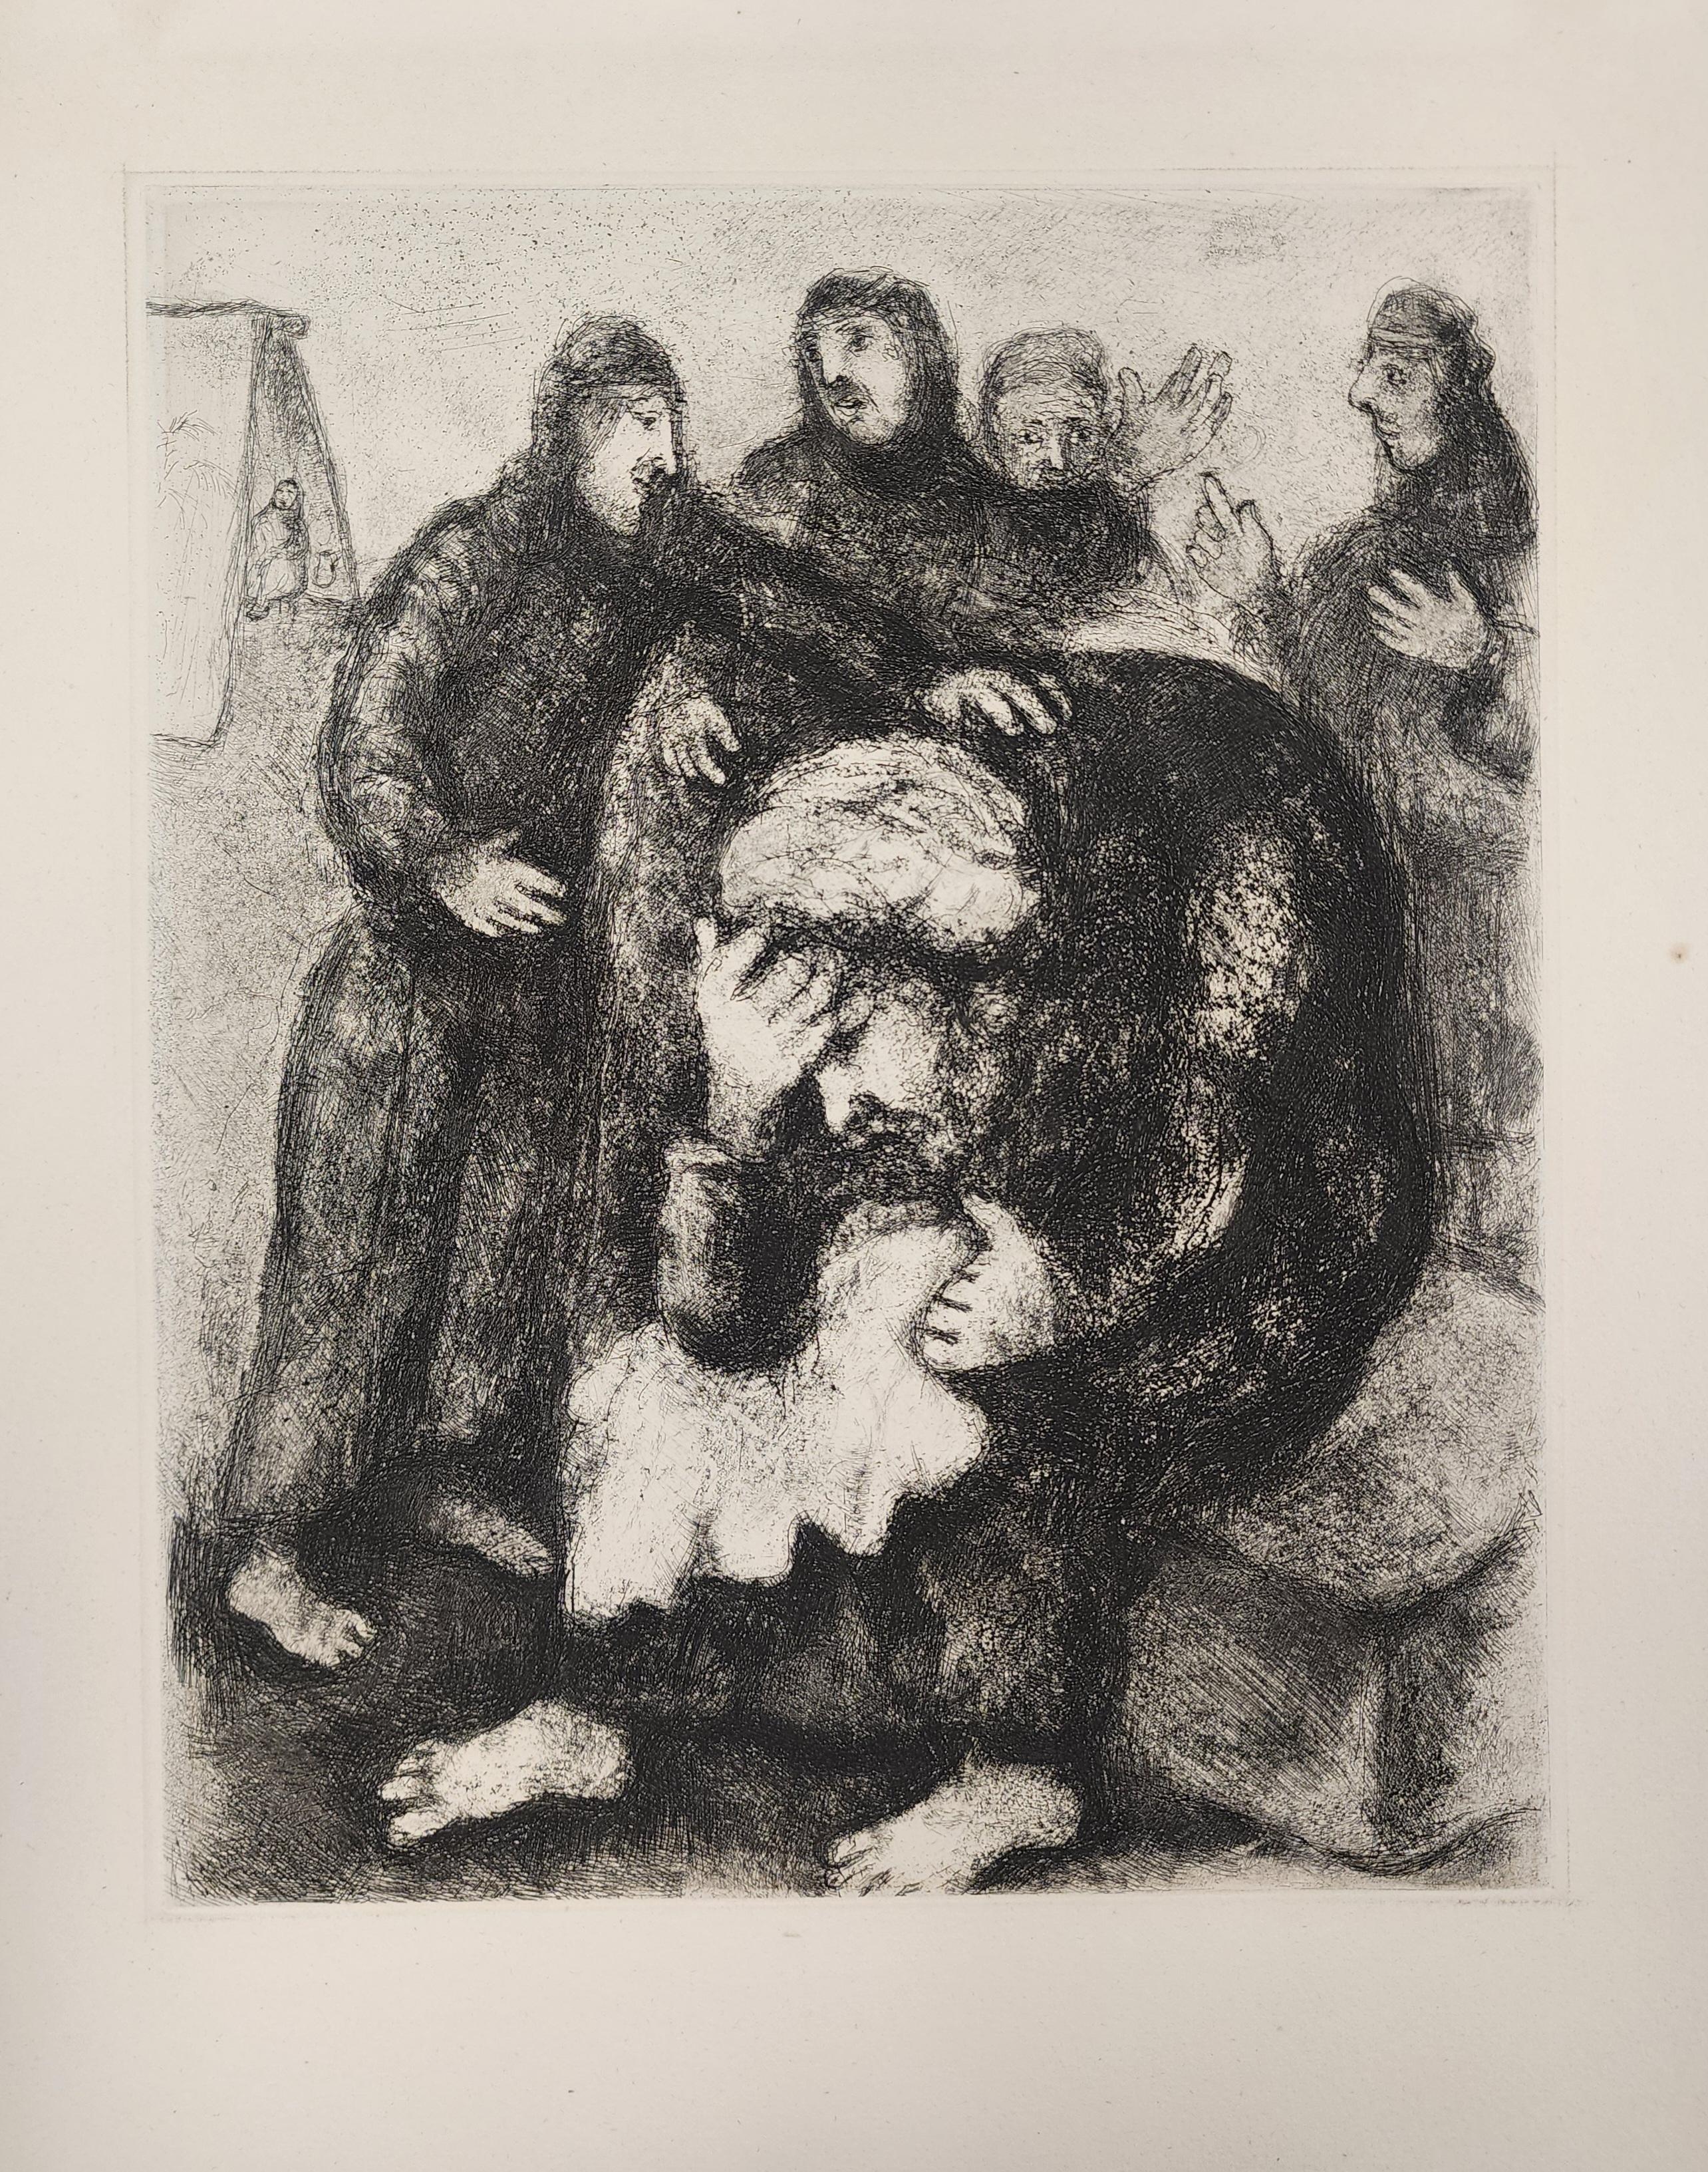 Description
Artist: Marc Chagall
Title: Jacob Weeps for Joseph
Year: 1956
Dimensions: 16.12" W: 12.37"
Medium: Etching, Unsigned
Condition: Excellent

After Chagall completed his etchings for The Fables (1930), Vollard again offered Chagall a